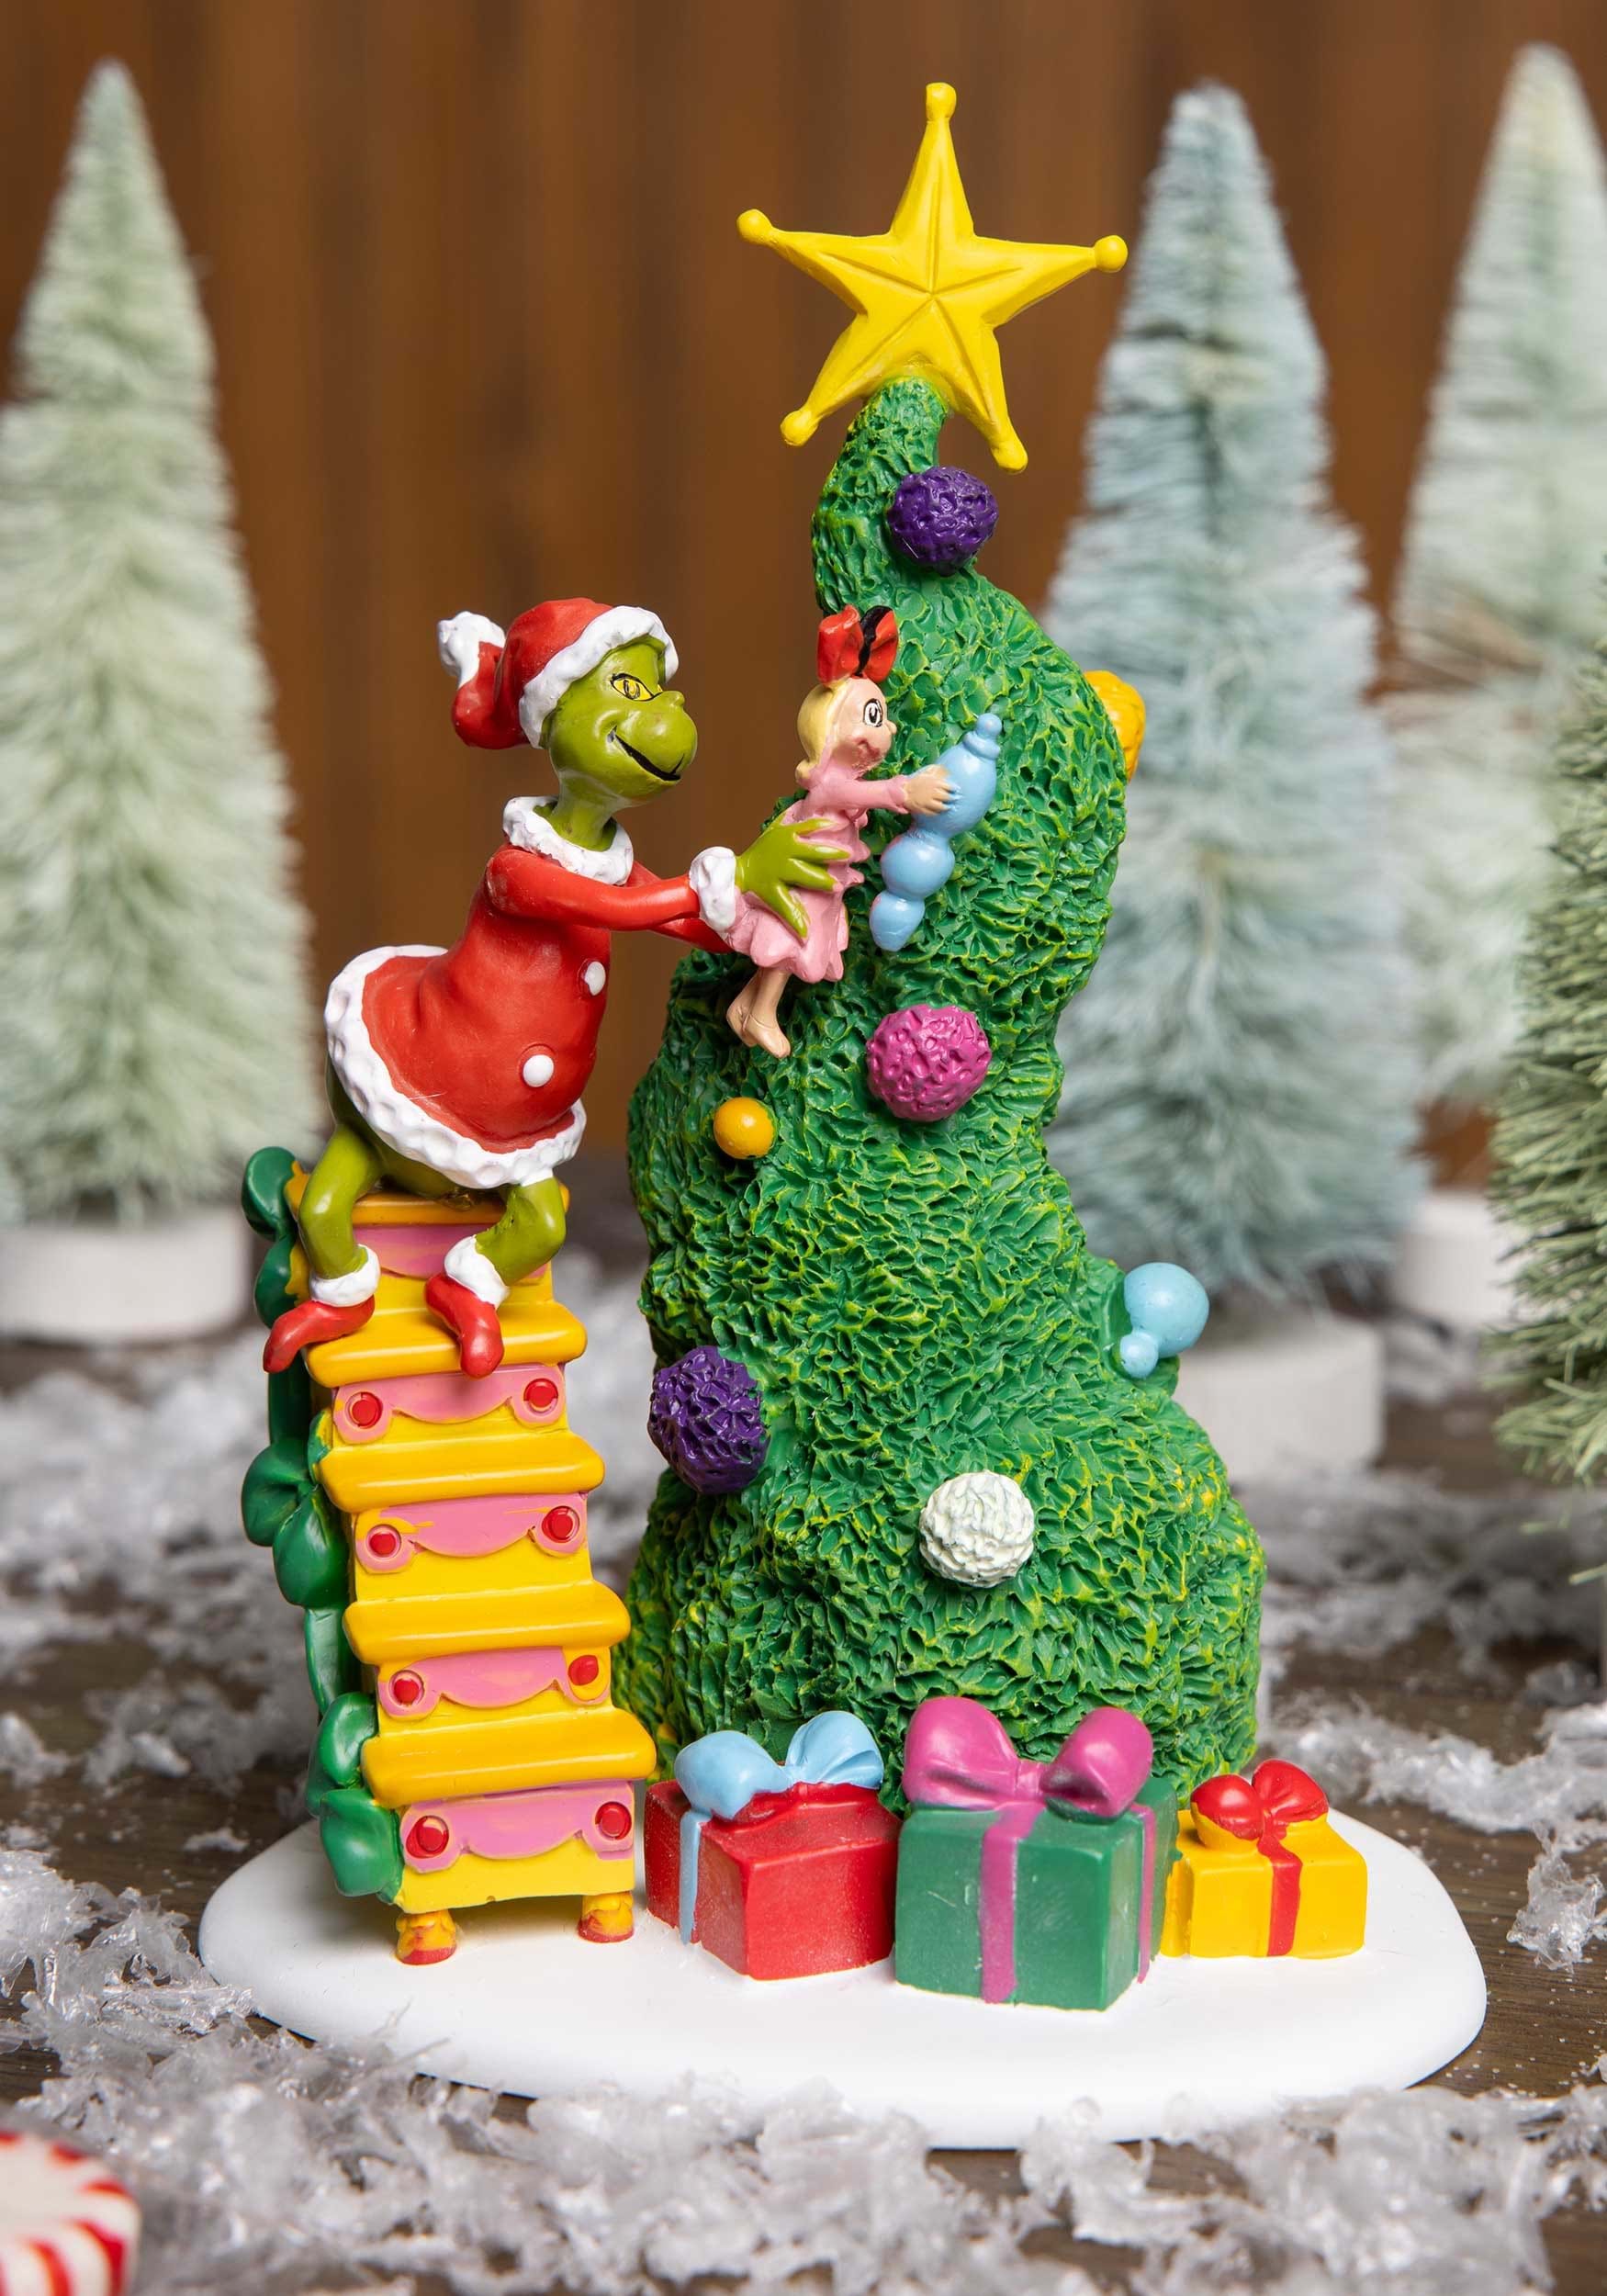 https://images.fun.com/products/65741/1-1/it-takes-two-grinch-and-cindy-lou-who-tree-figure.jpg